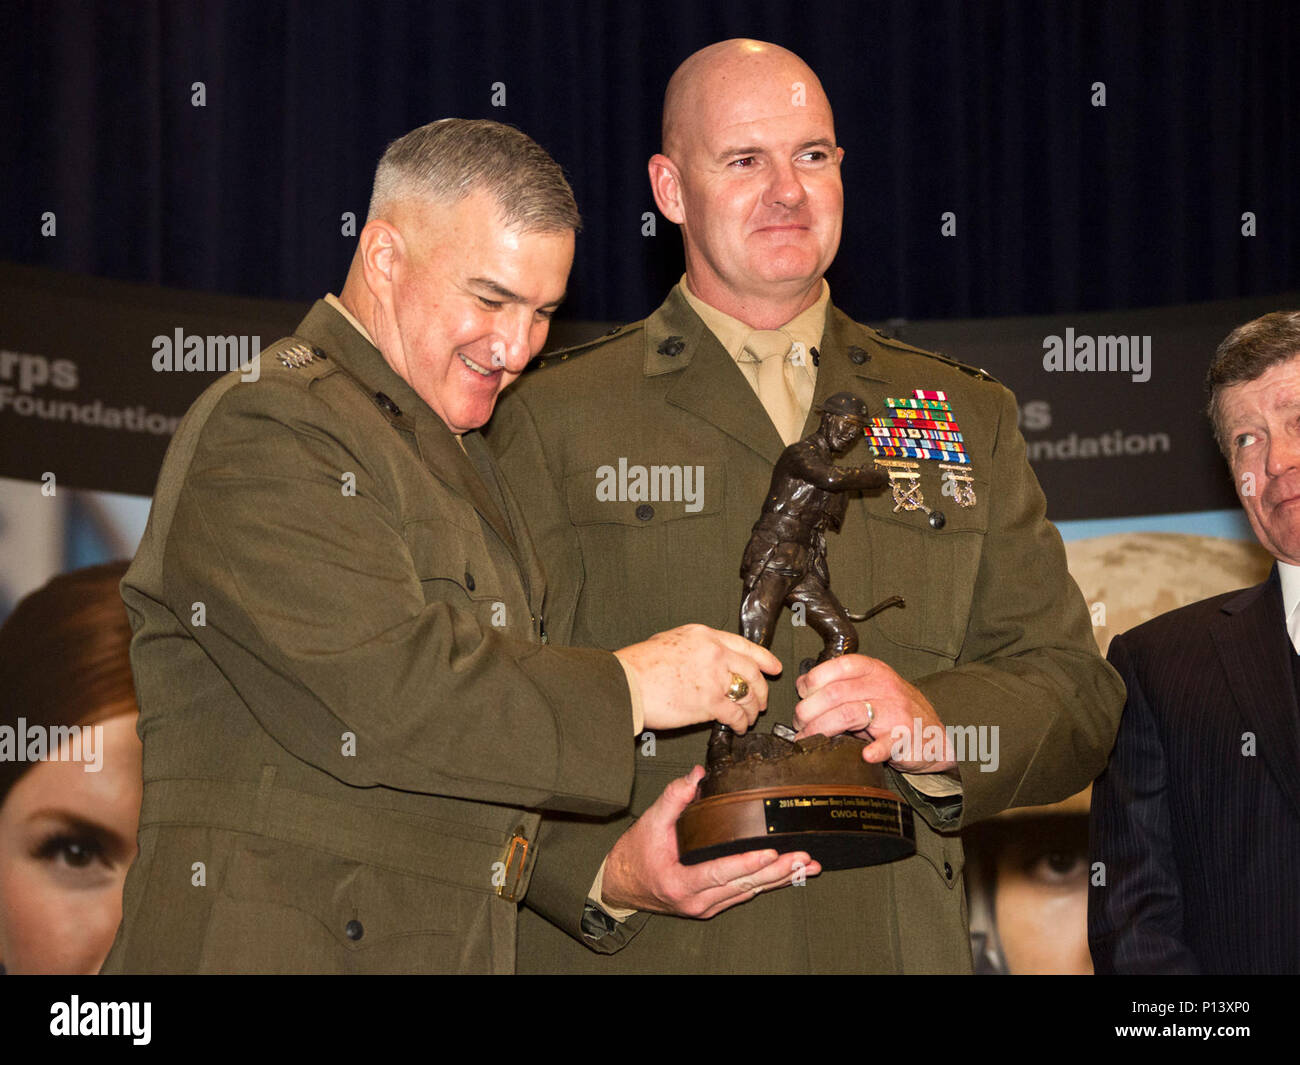 U.S. Marine Corps Gen. Glenn M. Walters, left, 34th assistant commandant of the Marine Corps, awards Chief Warrant Officer 4 Christopher Jones, recipient of the Marine Gunner Henry Lewis Hulbert award, during the Marine Corps Association and Foundation 14th Annual Ground Awards Dinner, May 4, 2017. Walters was the guest speaker and presented awards to nine Marines during the event. Stock Photo